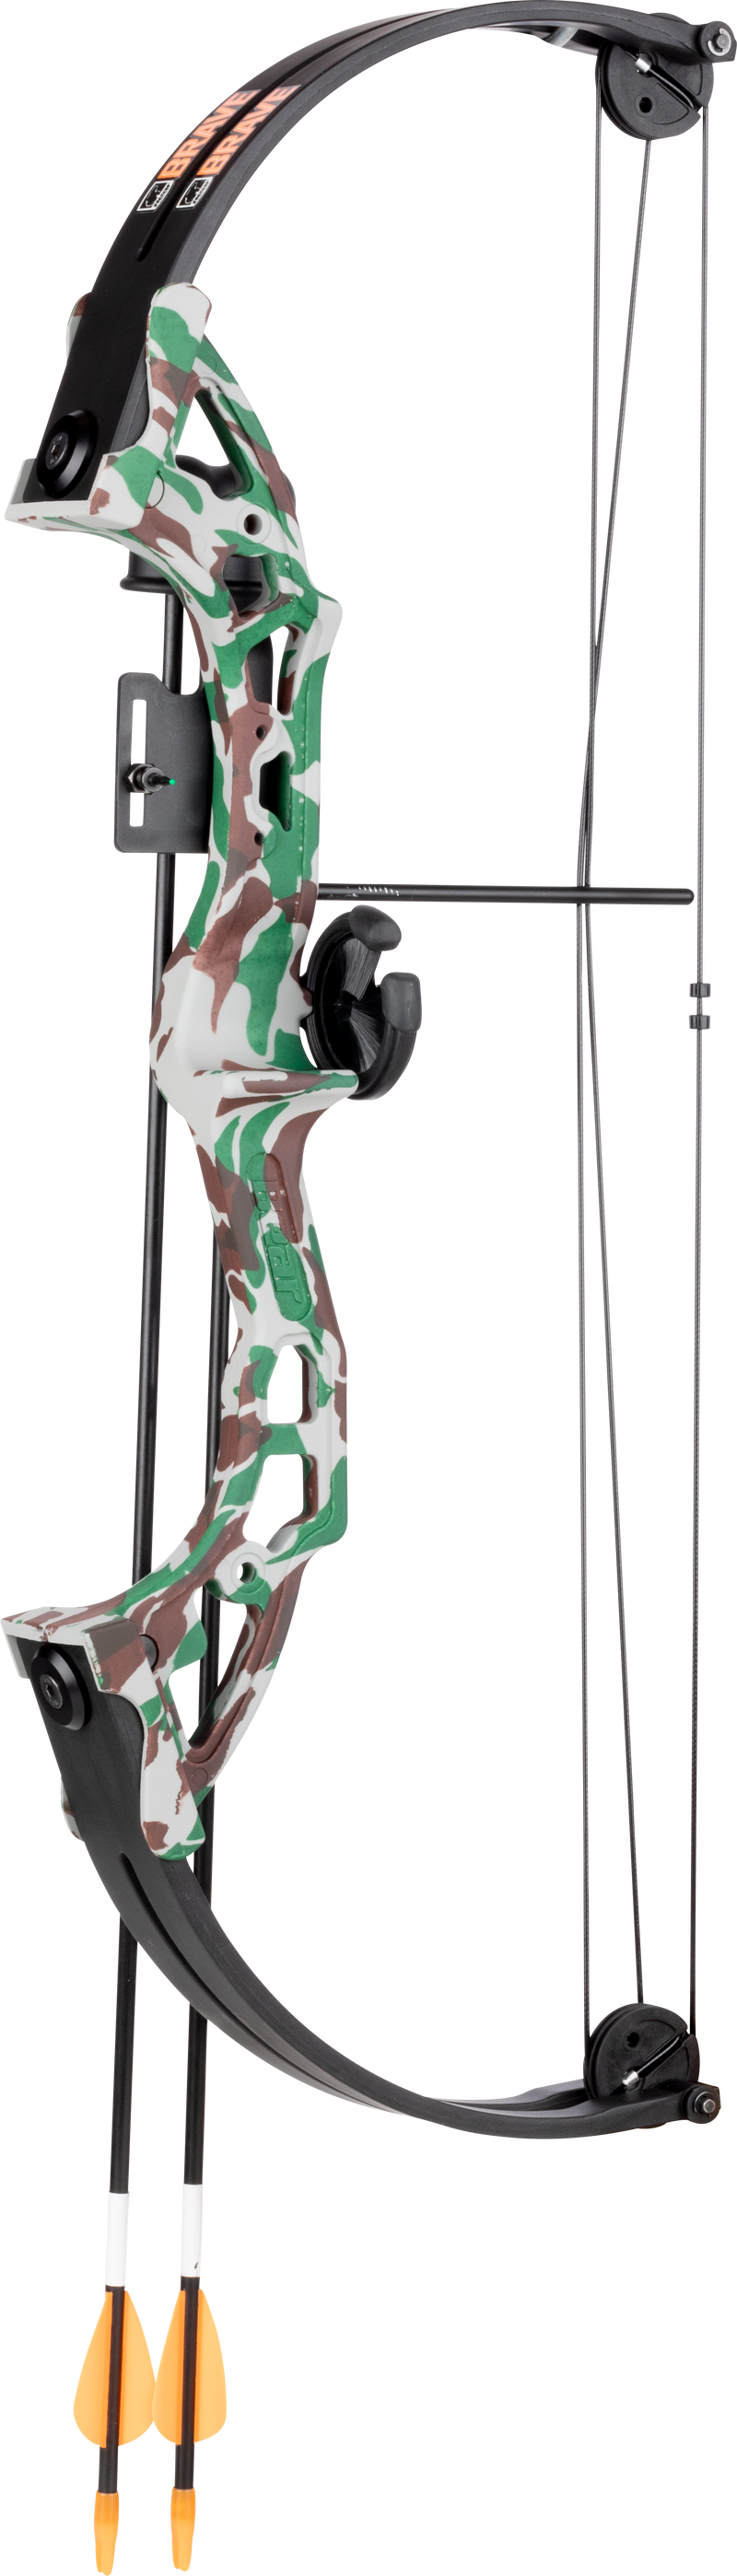 Bear Brave with Biscuit - Camo Compound Bow - Youth_1